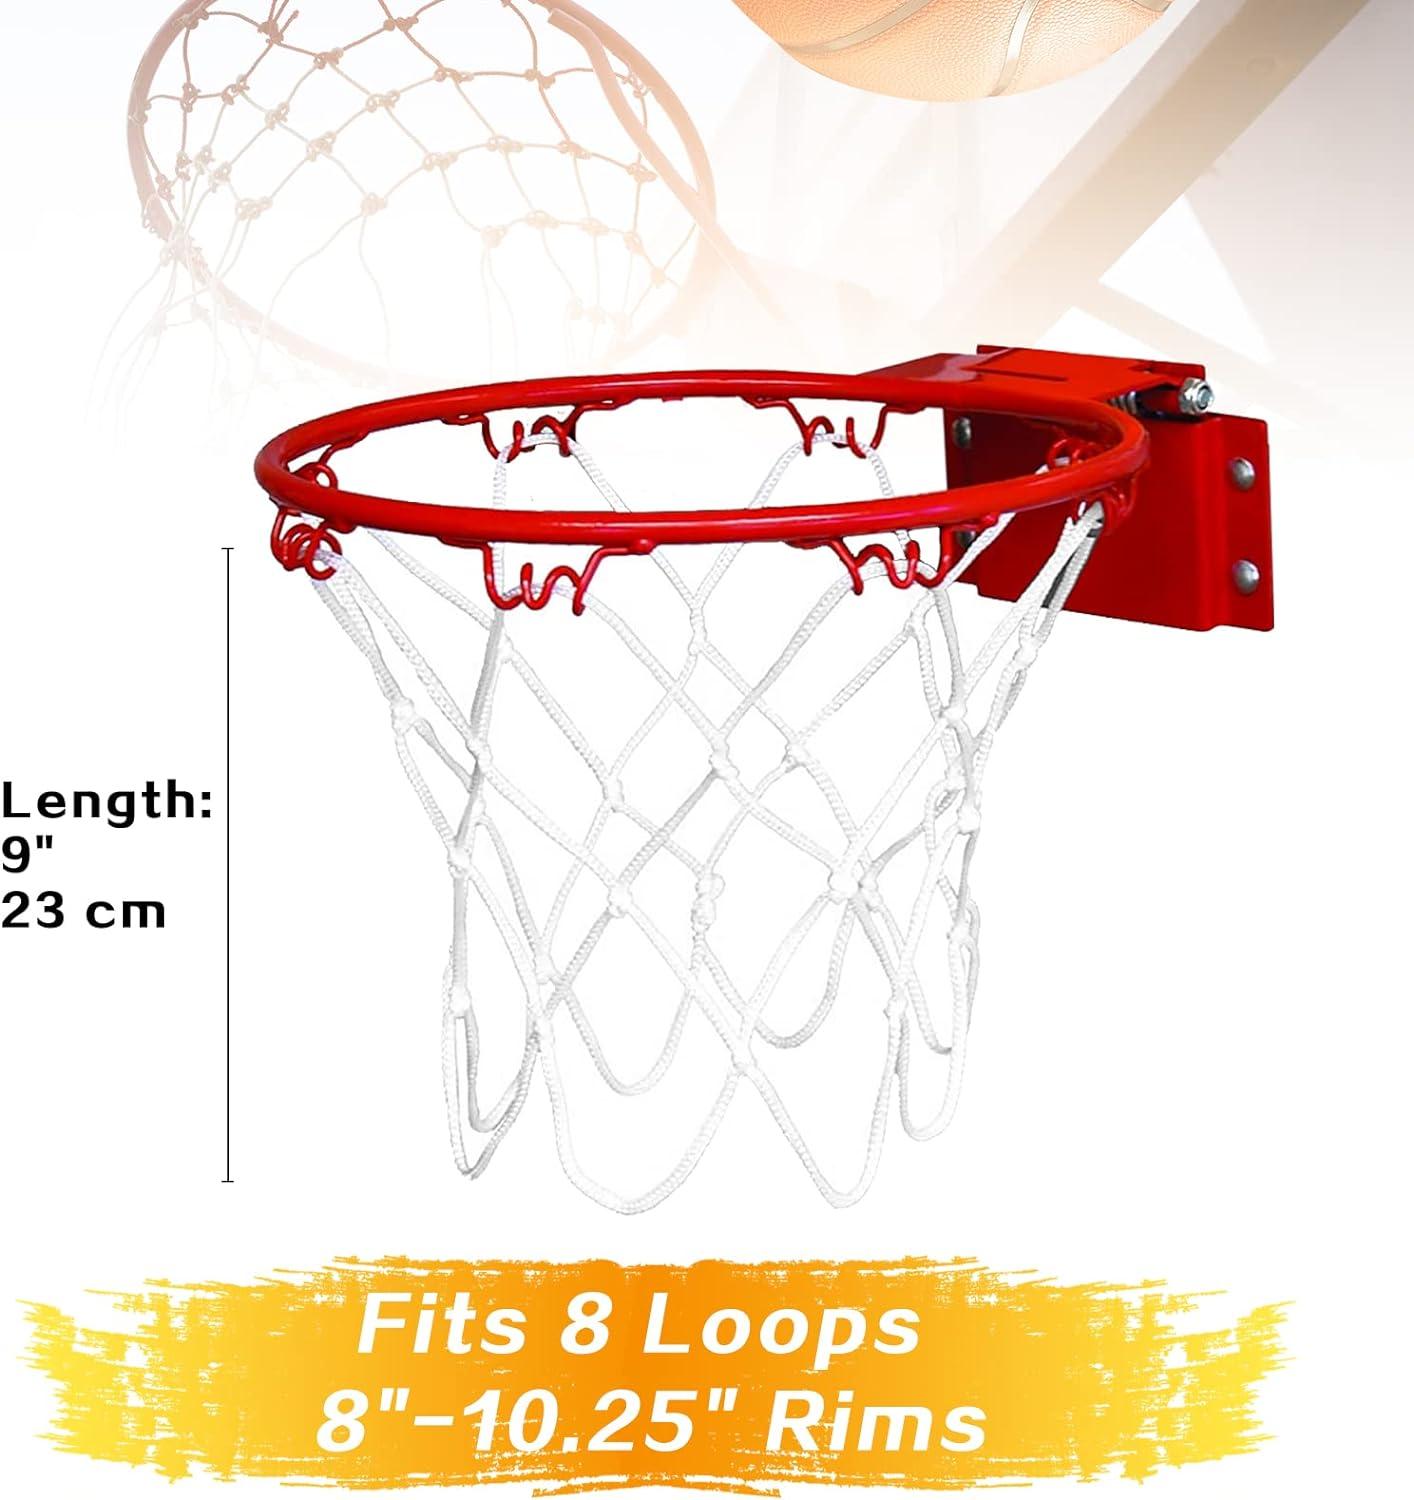 Toddler & Little Kids Replacement Basketball for Little Tikes